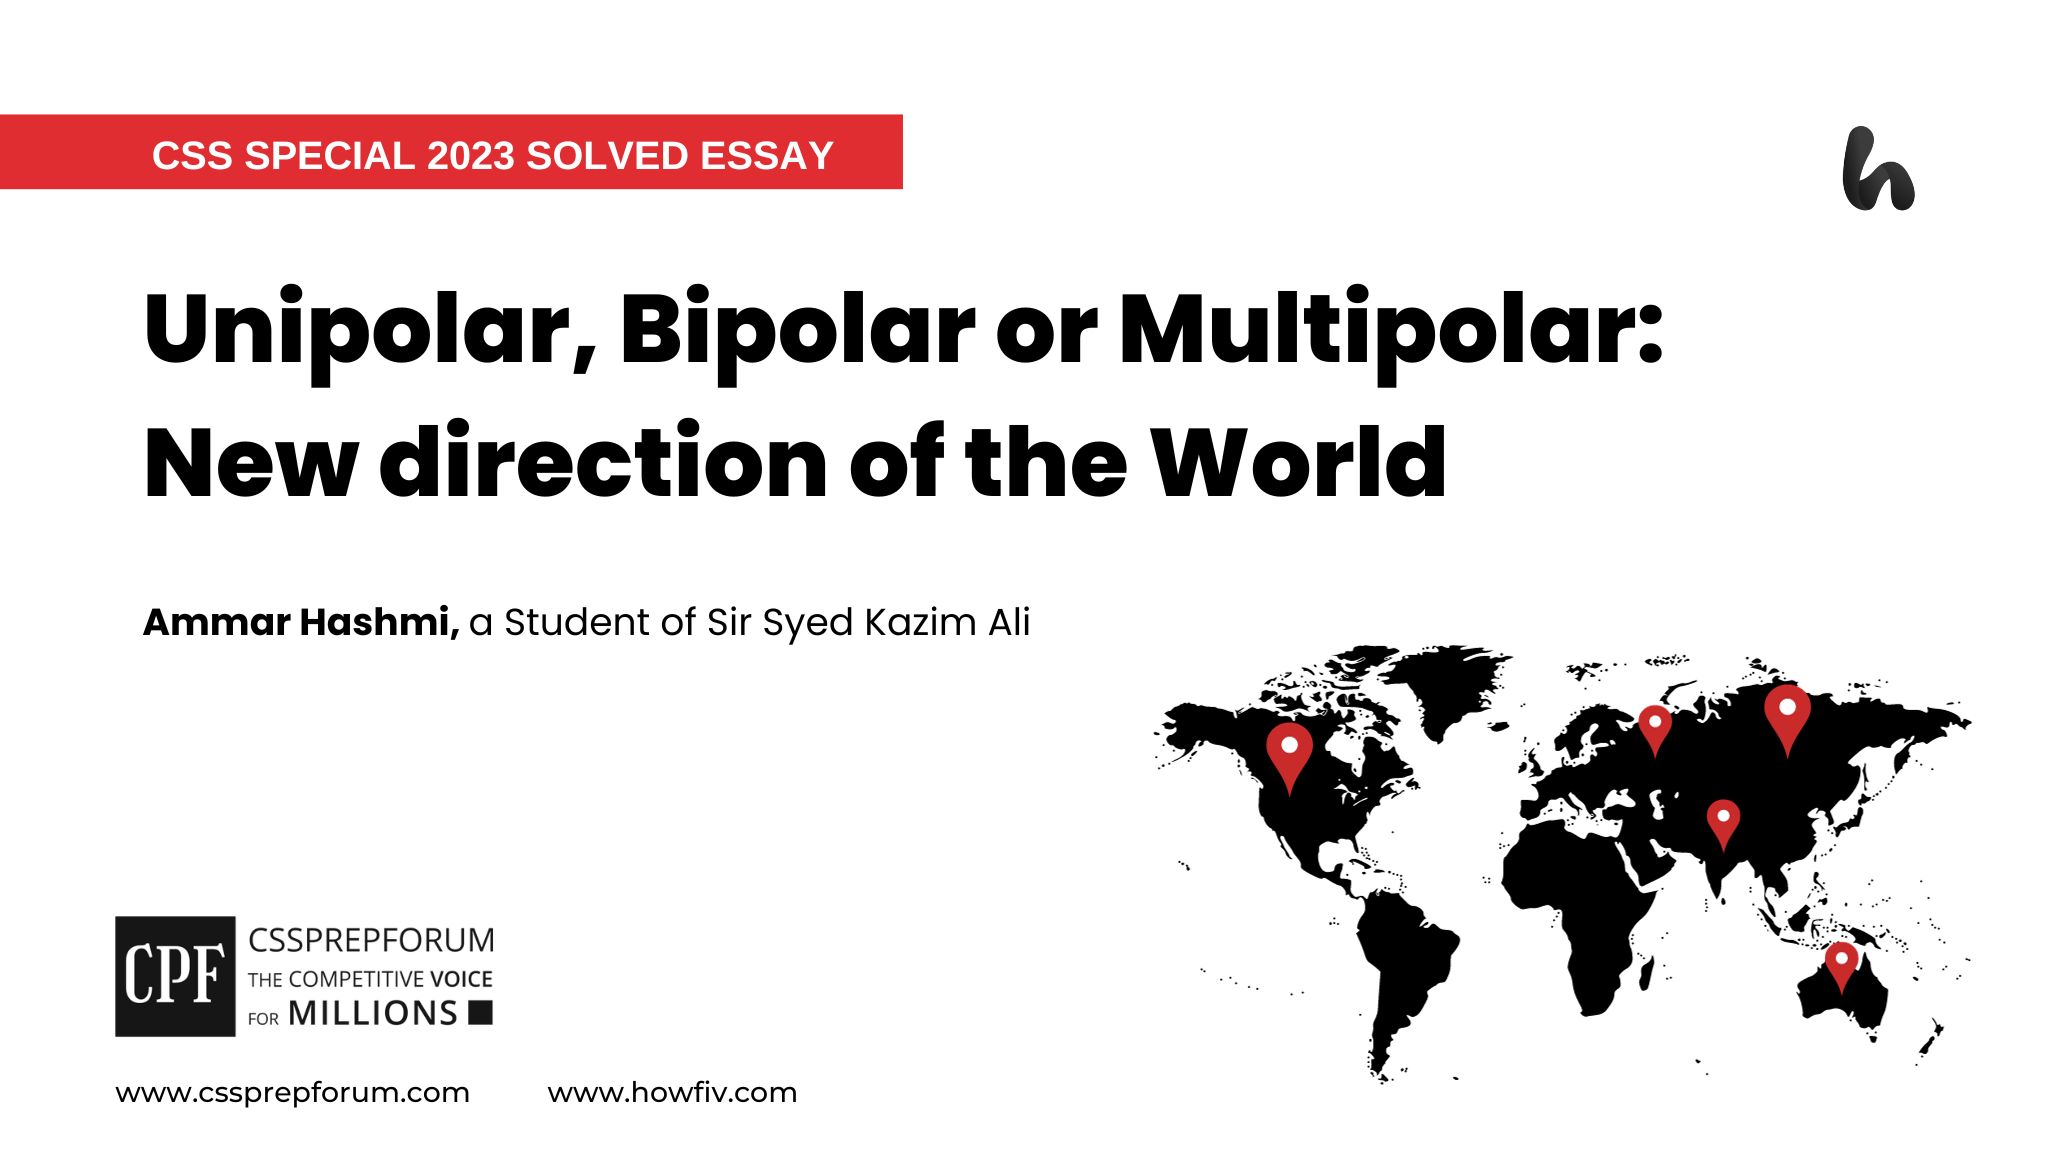 Although for decades, the world has seen the bipolar and then the unipolar system, in the contemporary world, both these systems have become obsolete and are now being replaced by a multipolar system